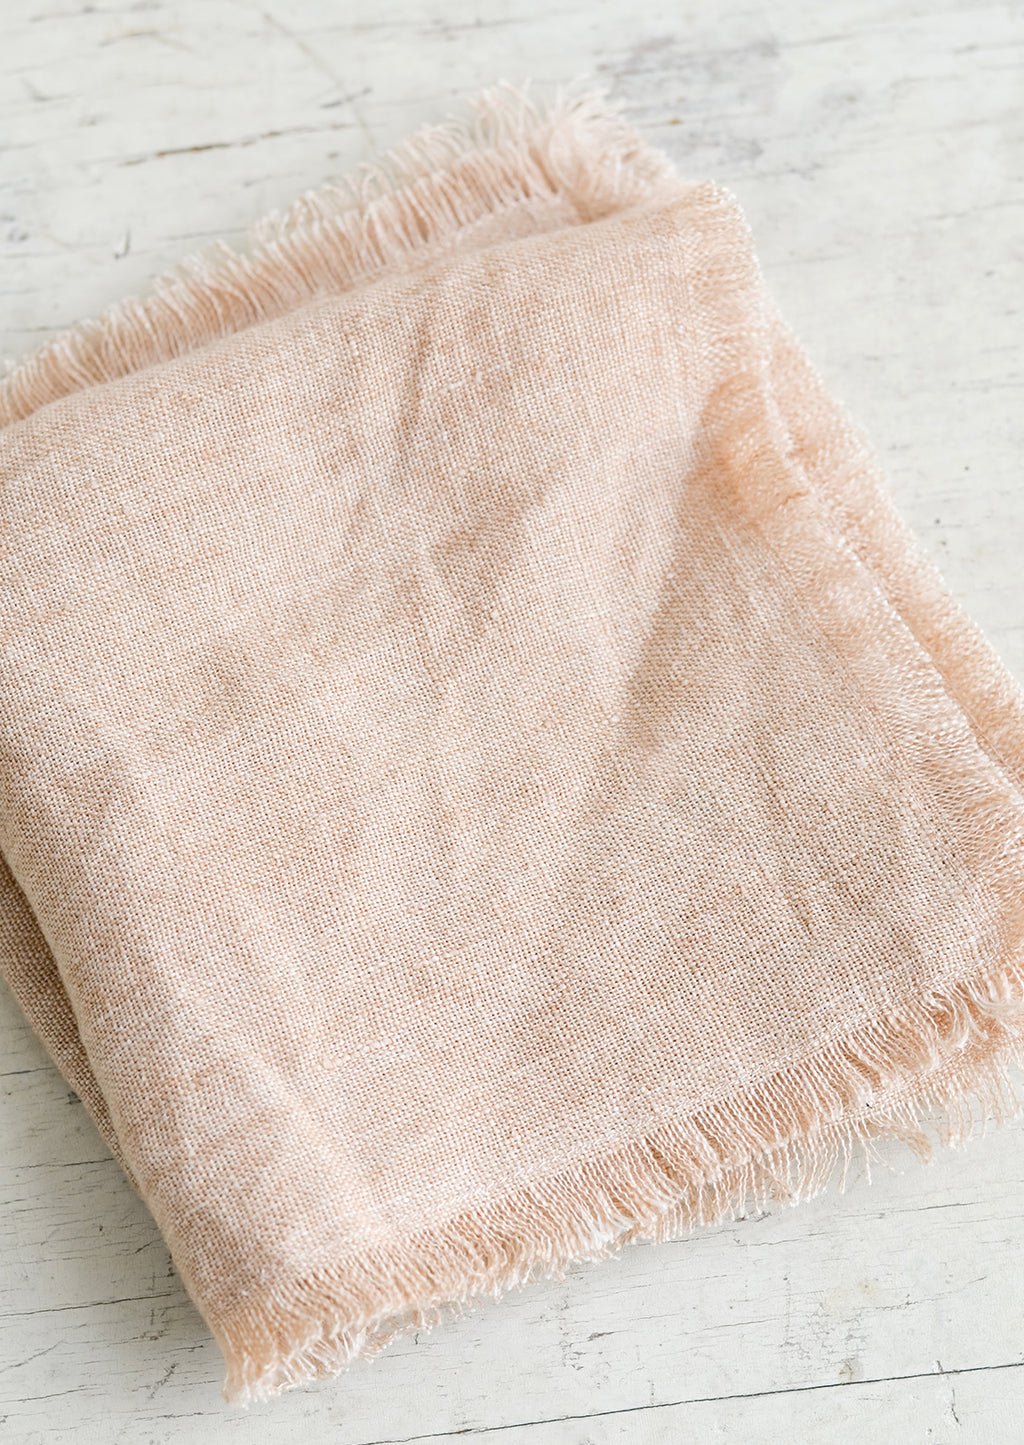 Dusty Rose: A folded dusty pink linen napkin with frayed edges.